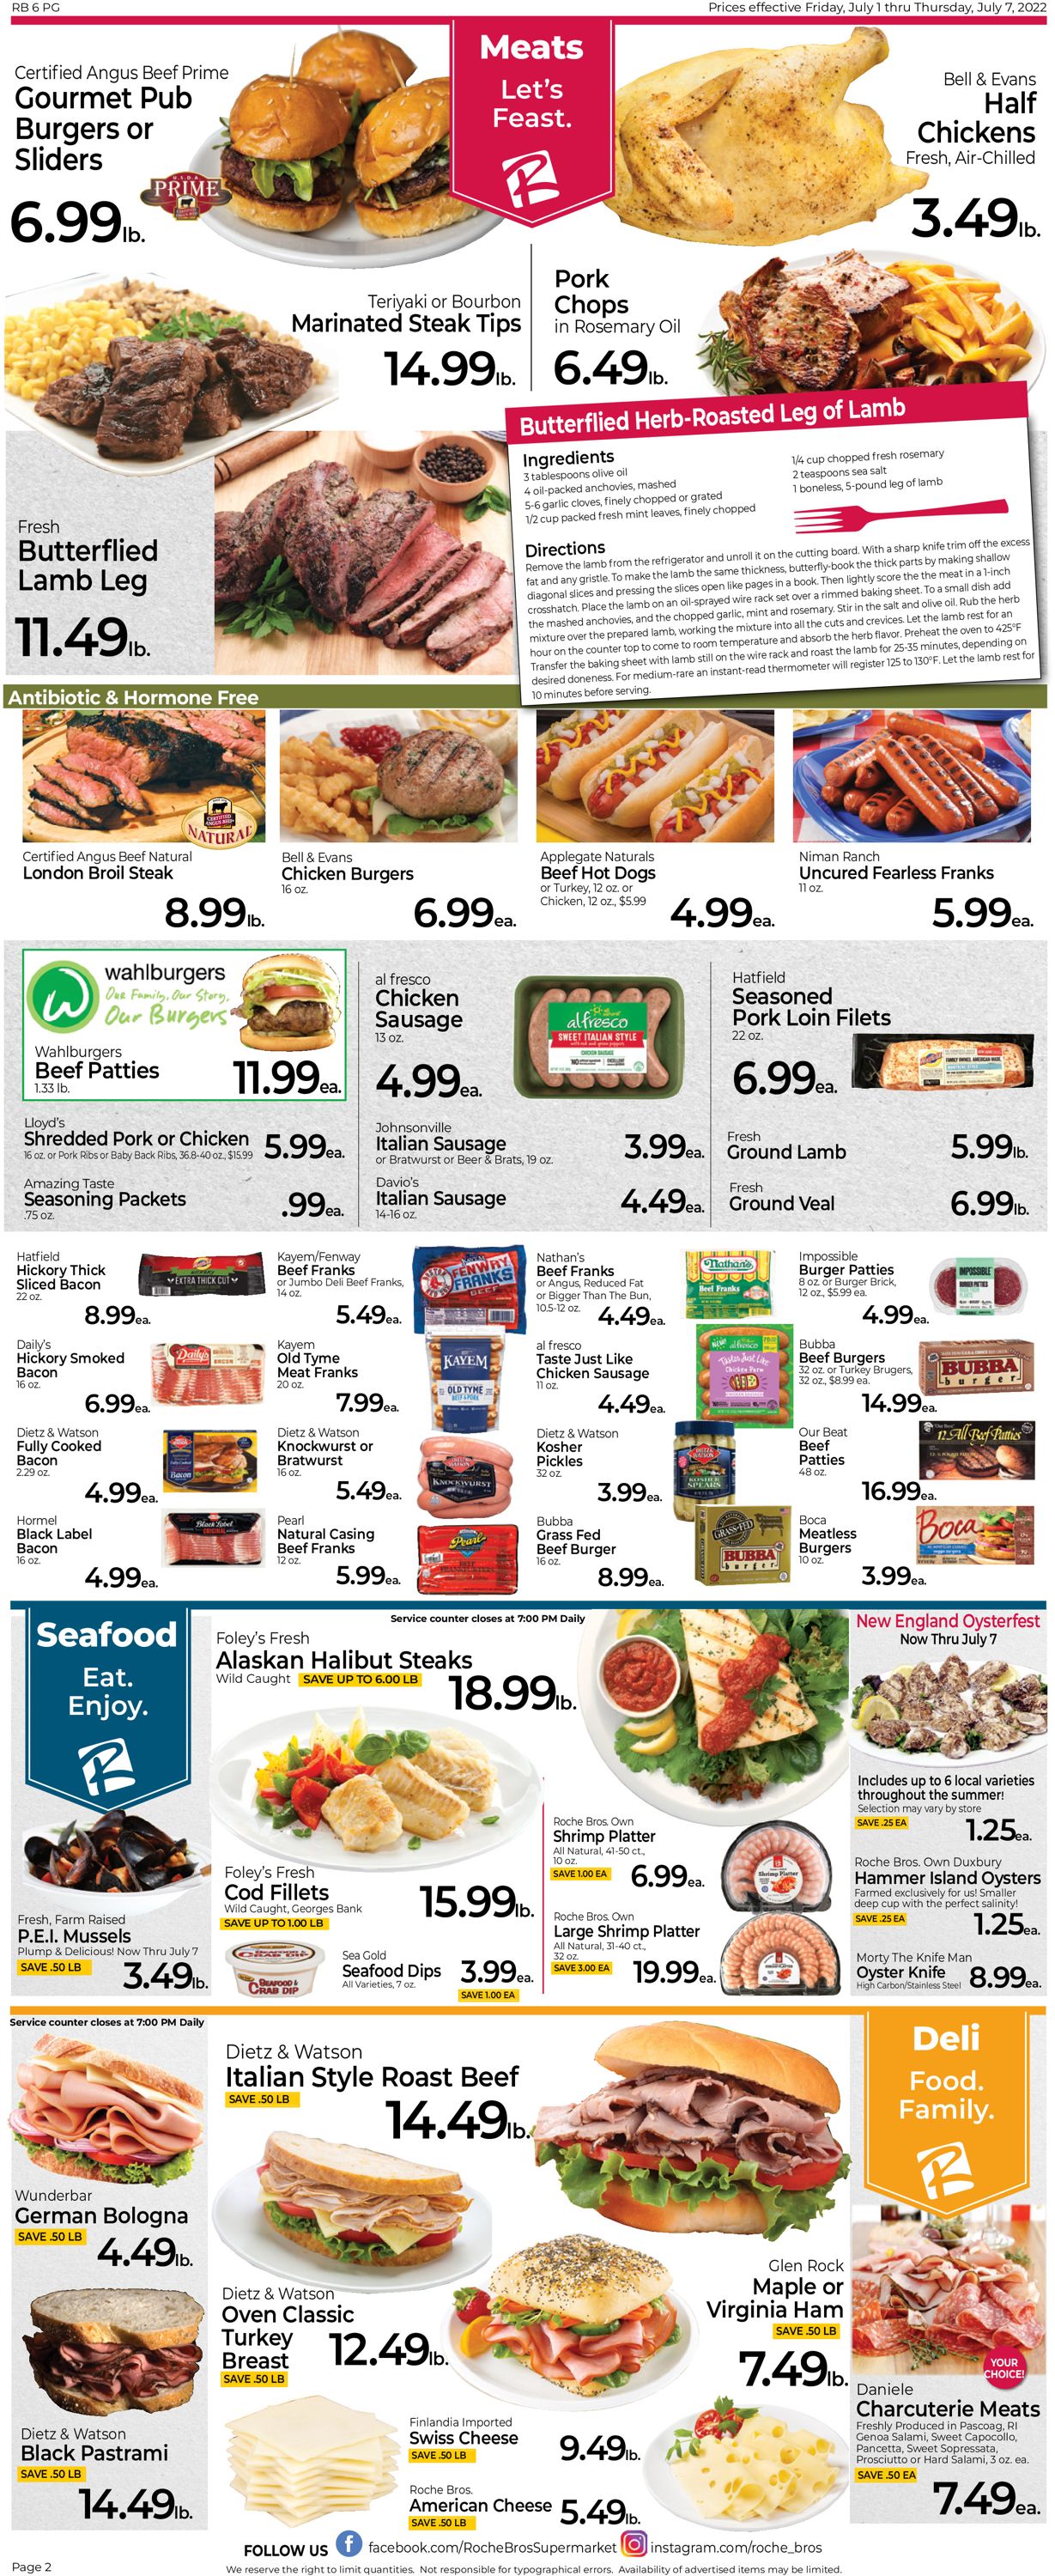 Roche Bros. Supermarkets - 4th of July Sale Weekly Ad Circular - valid 07/01-07/07/2022 (Page 2)